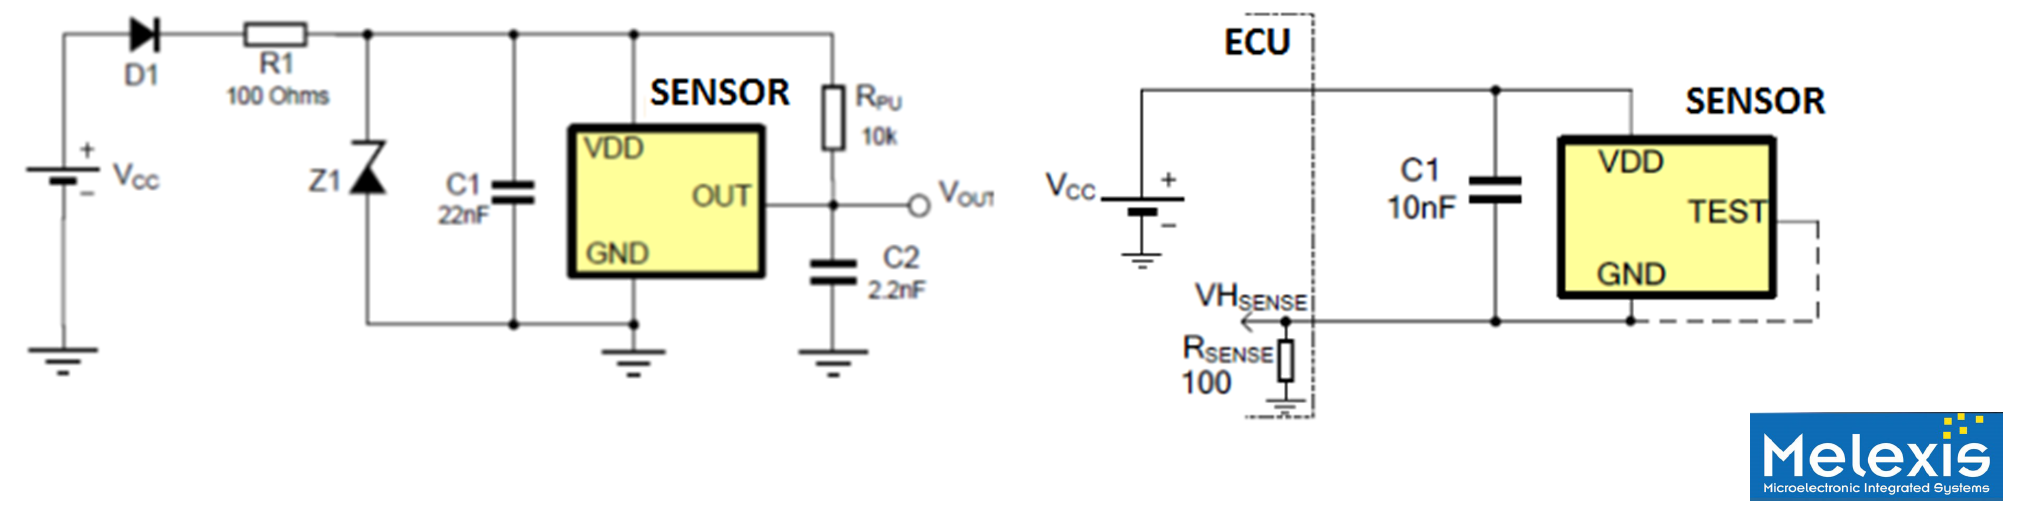 Figure 2 - comparison between 3-wire & 2-wire Hall sensor implementations